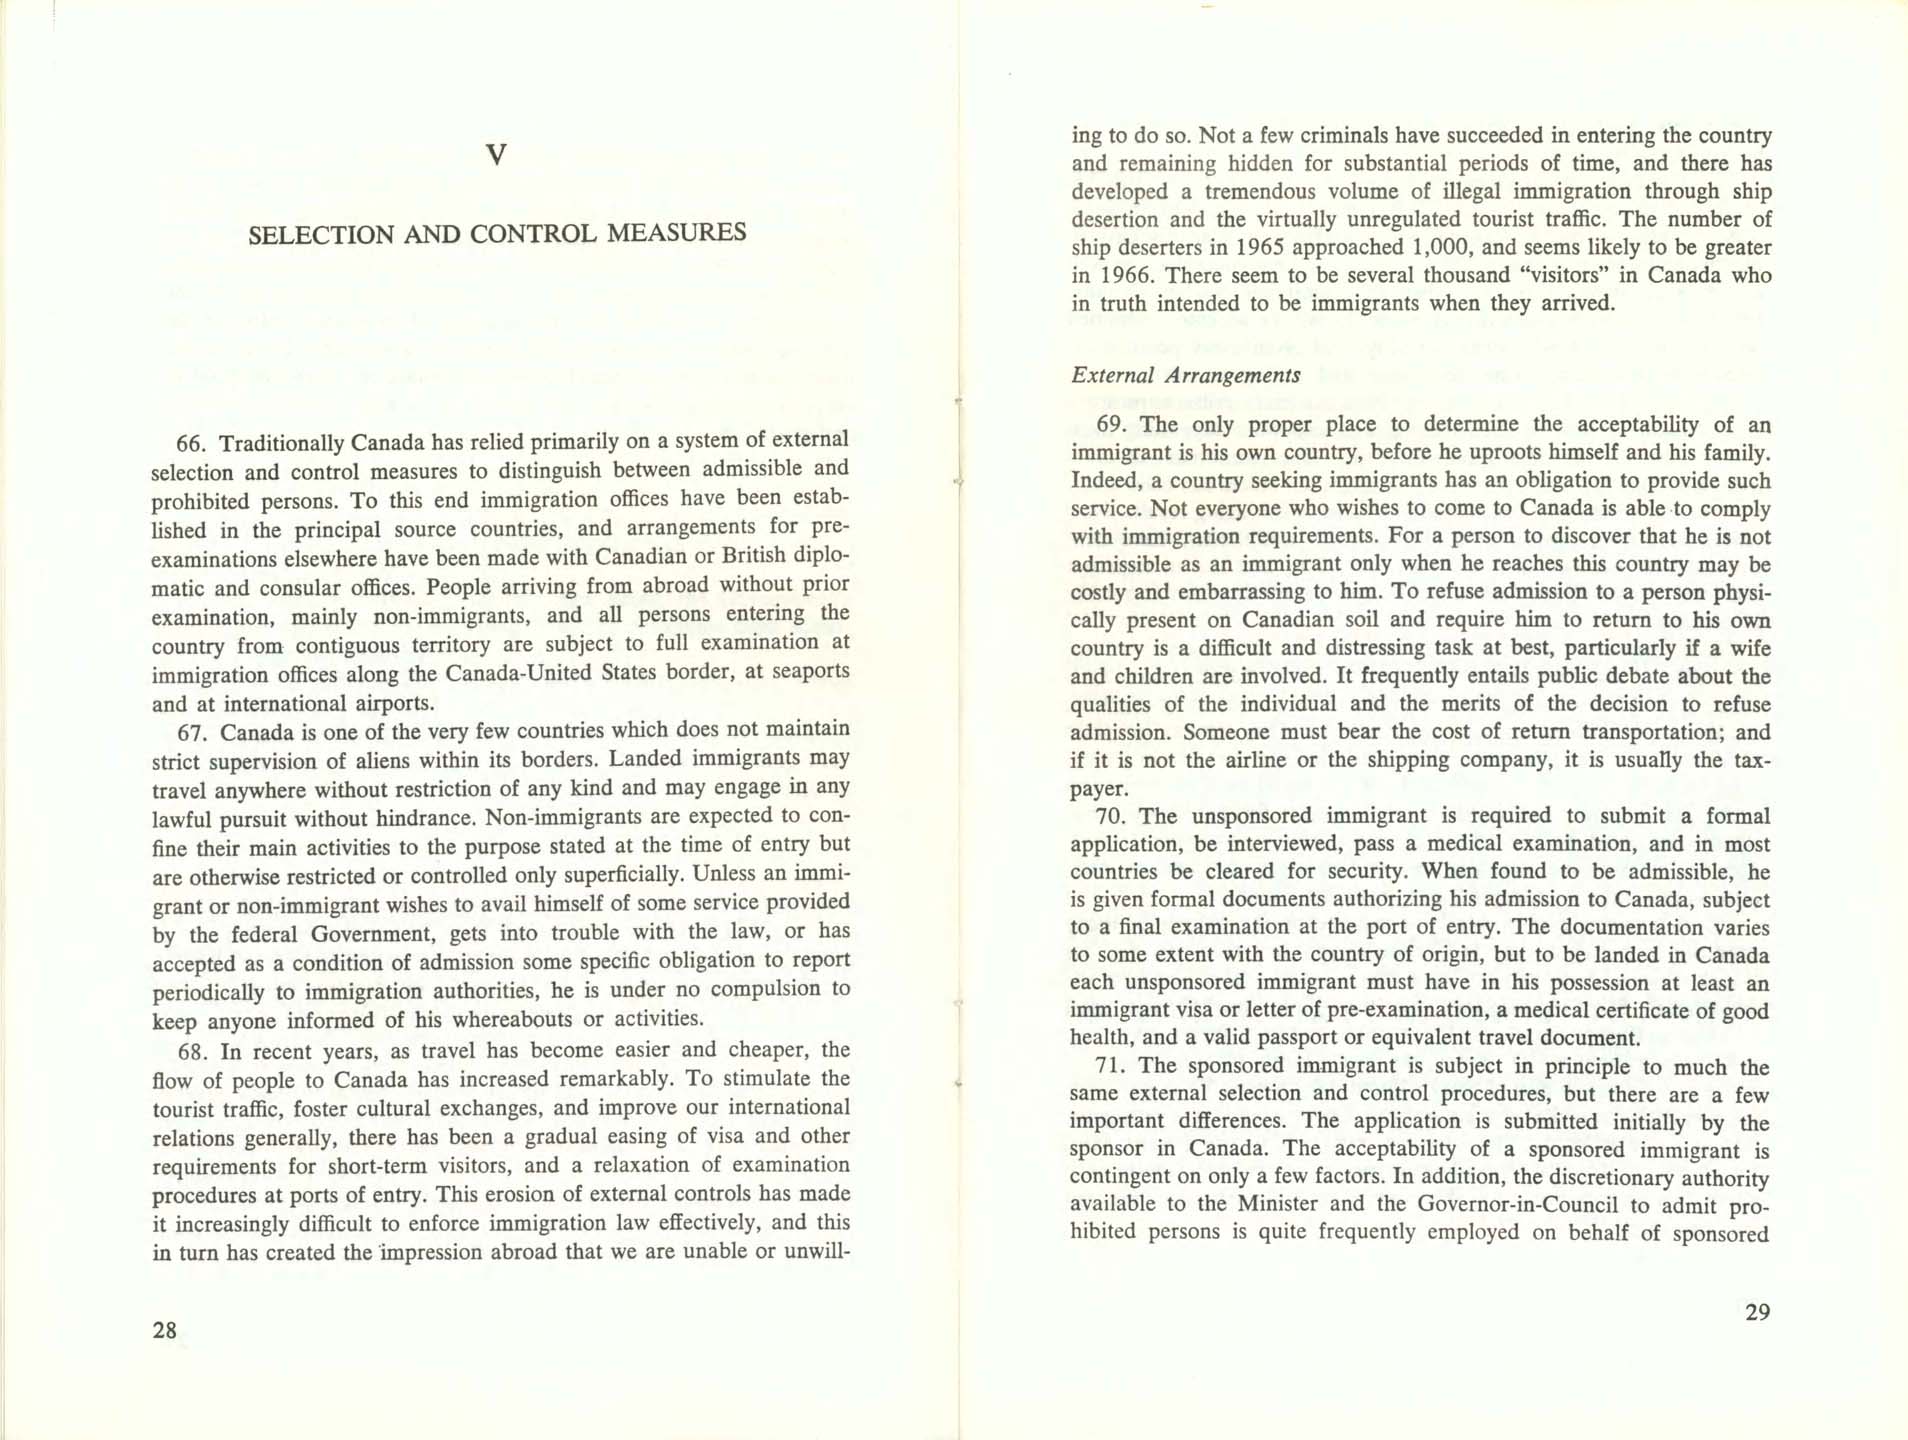 Page 28, 29 White Paper on Immigration, 1966